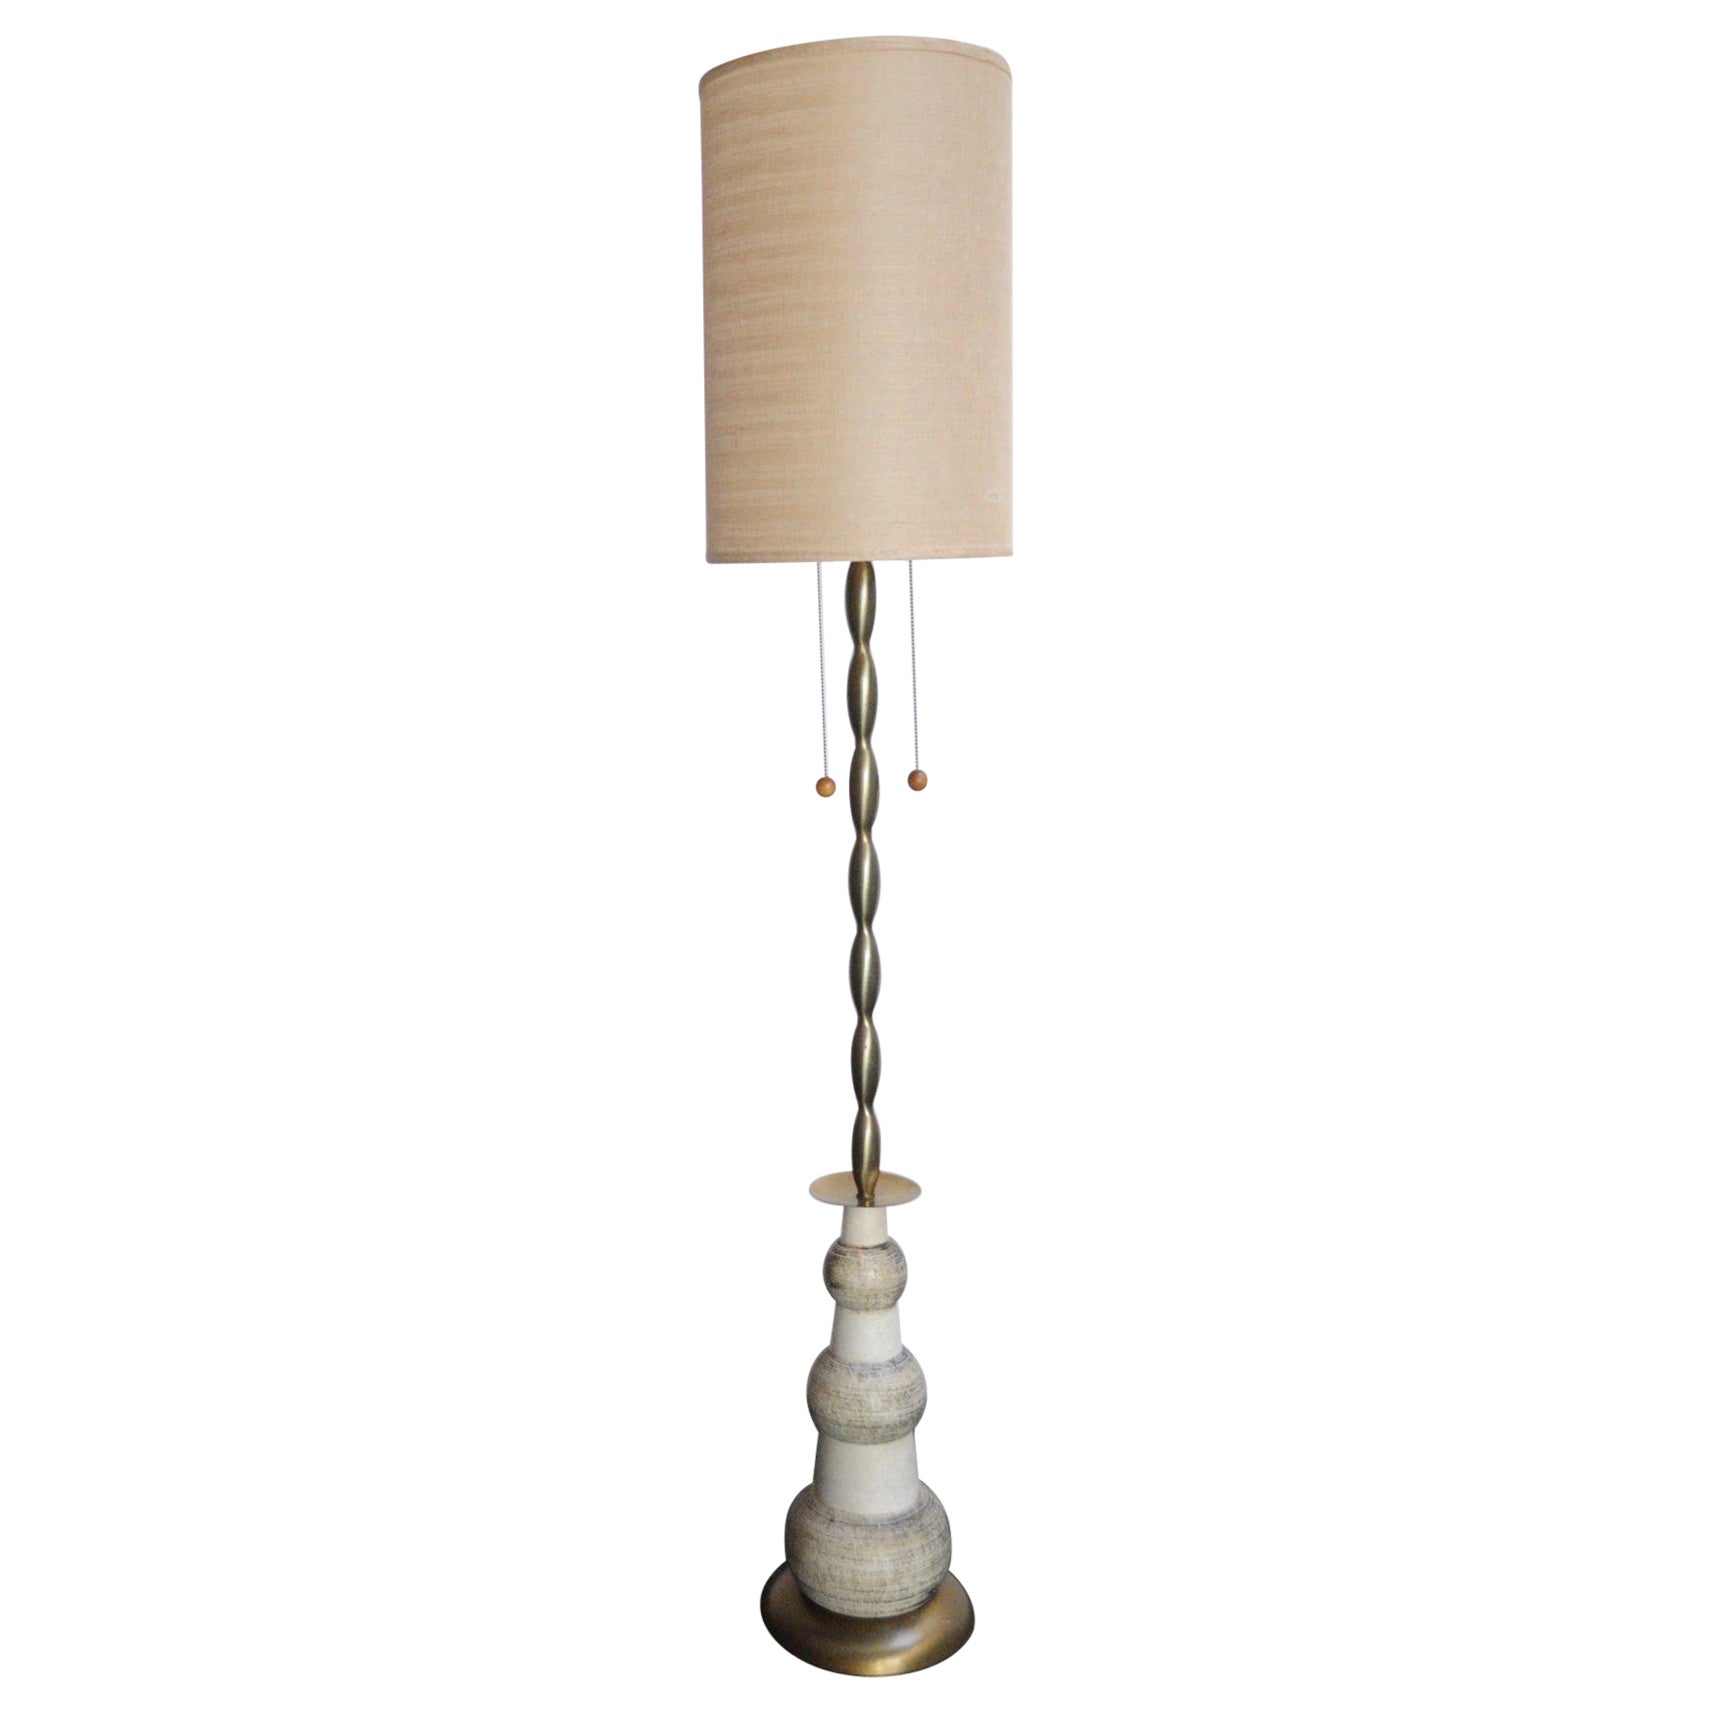 Vintage Ceramic and Brass Graduated Dual Socket Floor Lamp with Shade